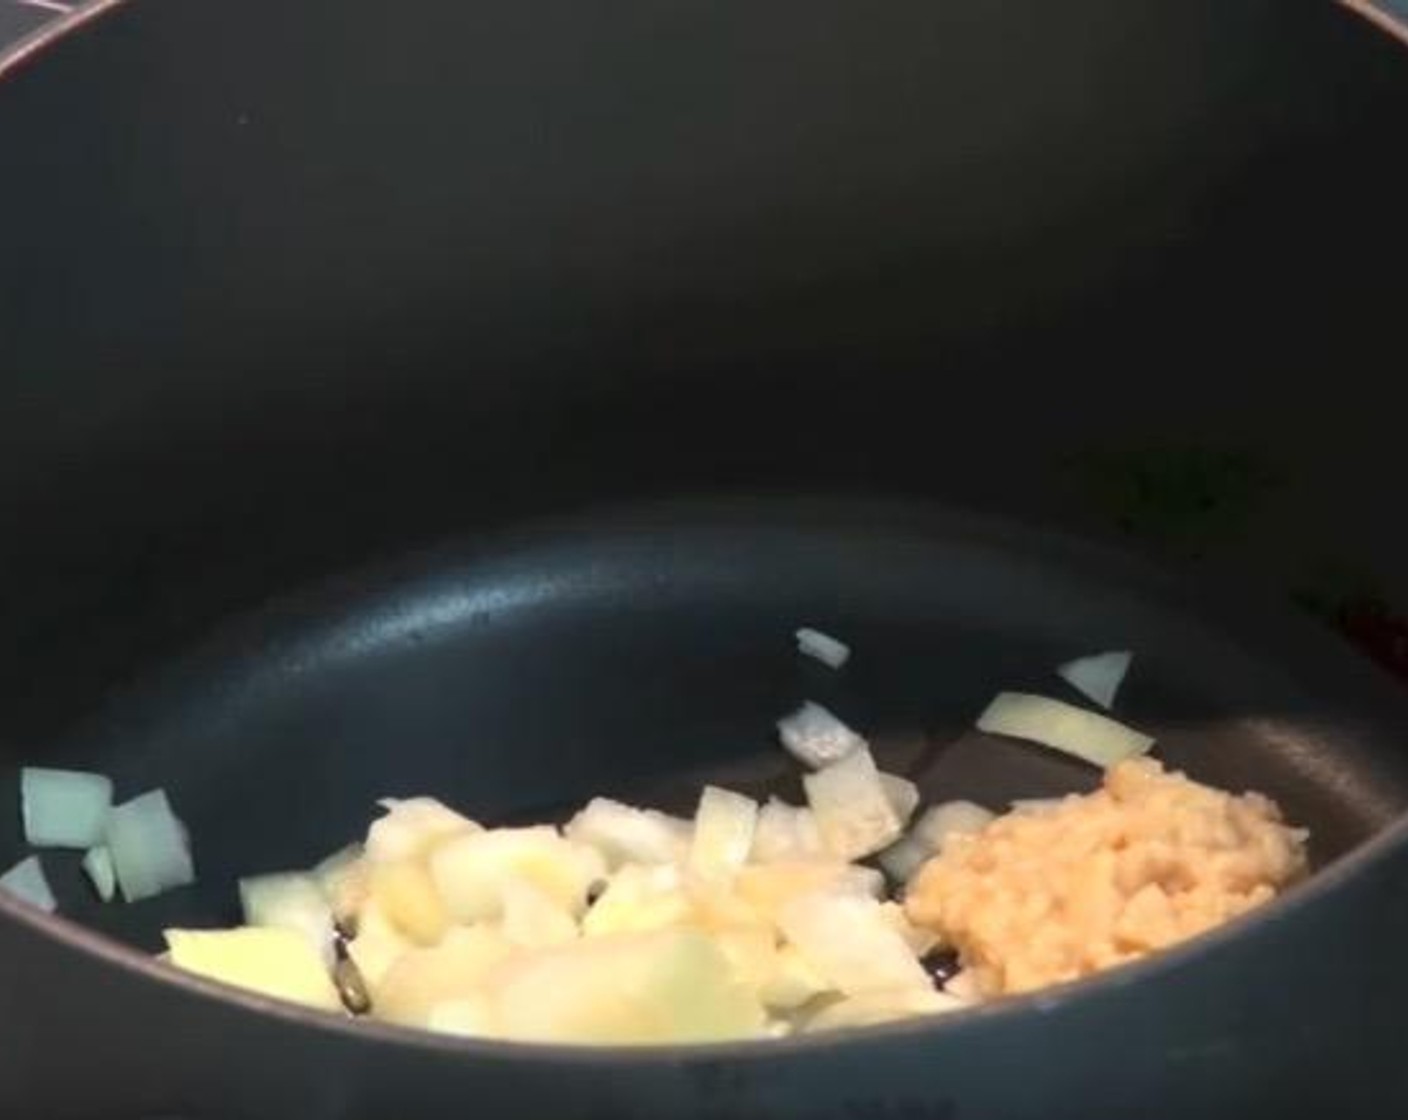 step 1 In a saucepan, add Olive Oil (as needed). Over medium heat, cook Yellow Onion (1) and Garlic (2 cloves) for 2-3 minutes, or until the onions have softened.